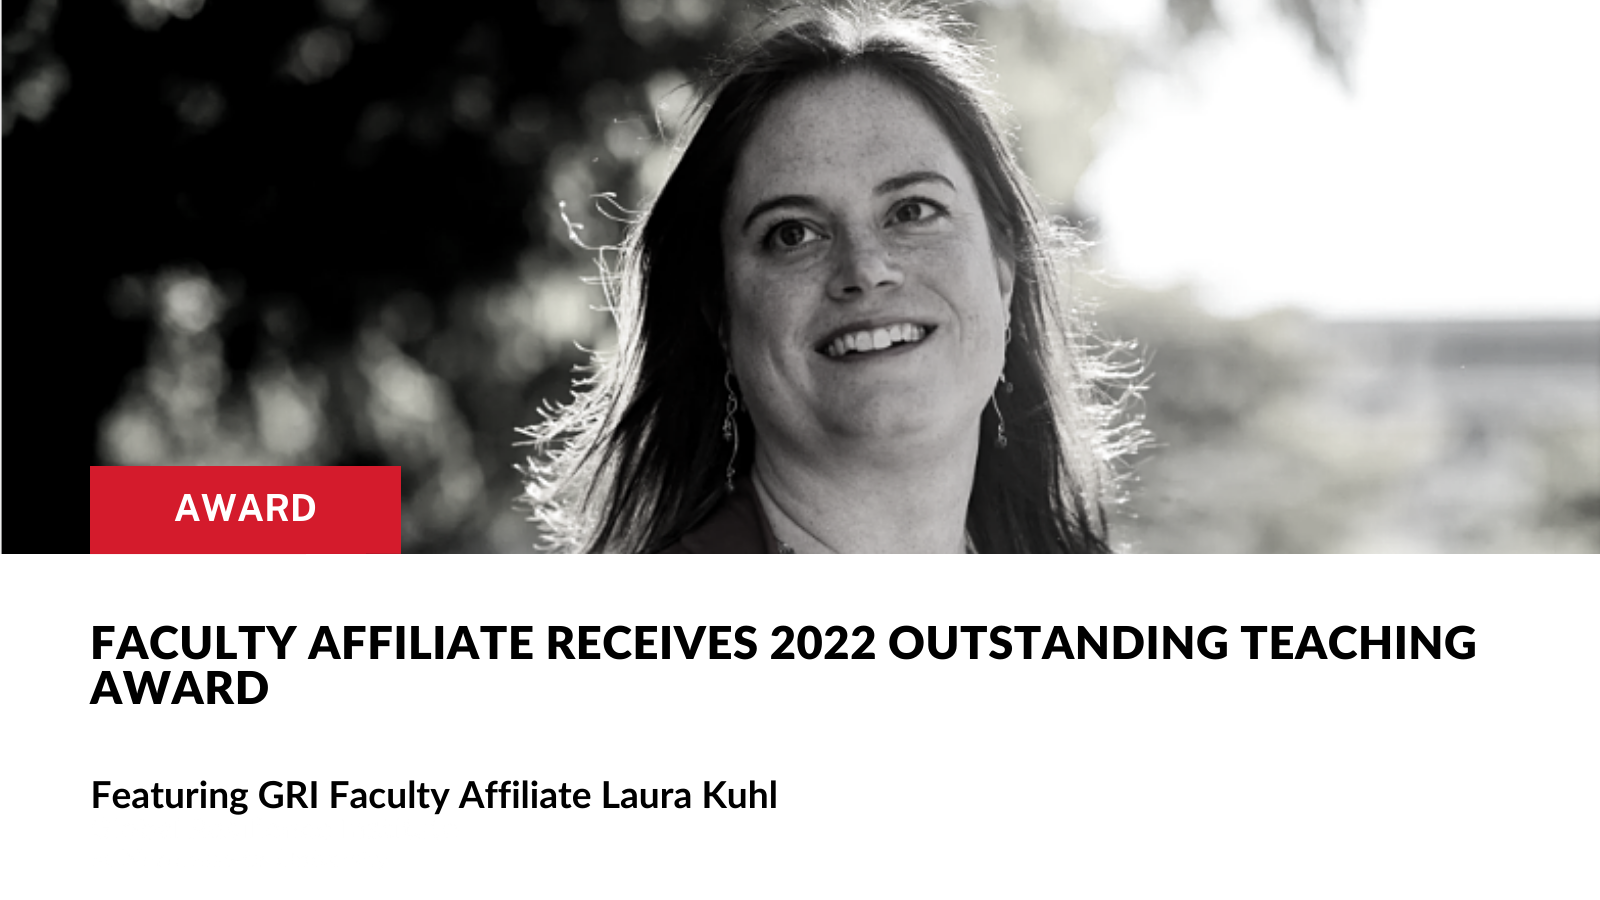 Faculty Affiliate Laura Kuhl Receives 2022 Outstanding Teaching Award